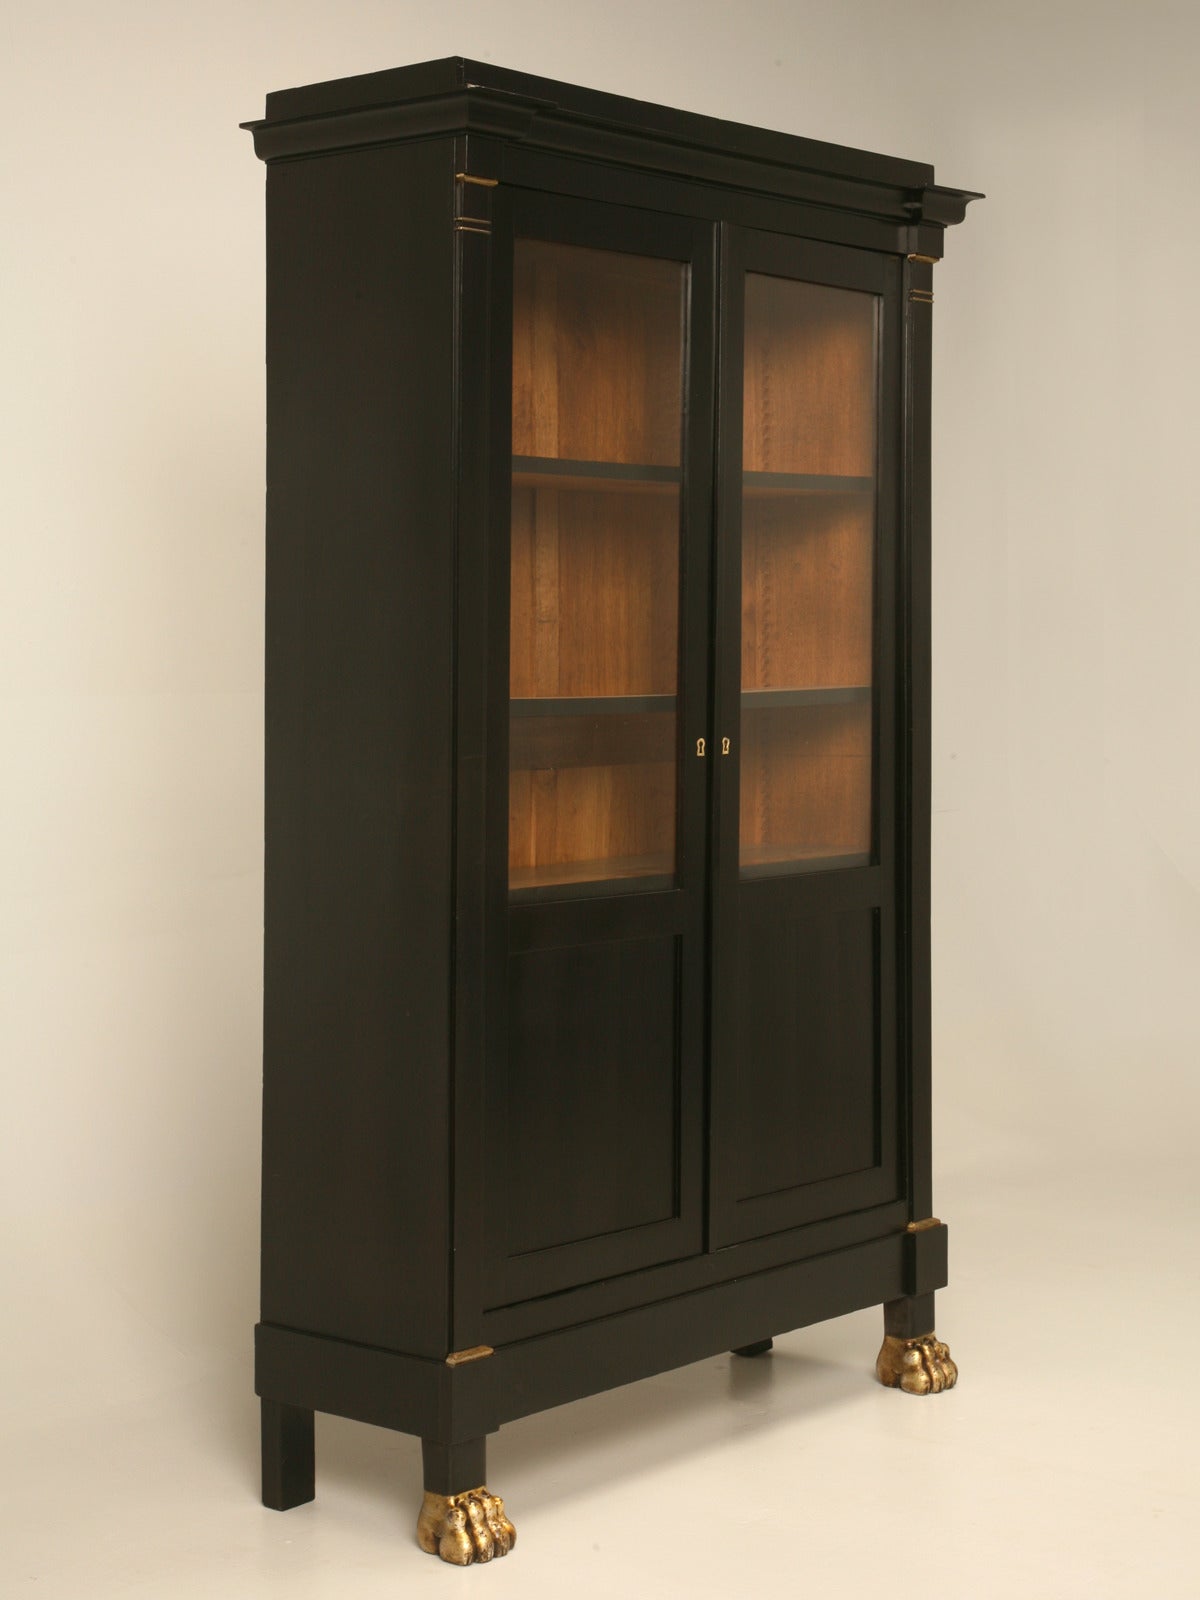 Beautifully proportioned ebonized mahogany bookcase, or bibliotheque, made in France during the mid-1800s. The gilded paw feet tie in quite nicely with the petite hints of gold on the raised moldings. Our Old Plank in house workshop completely